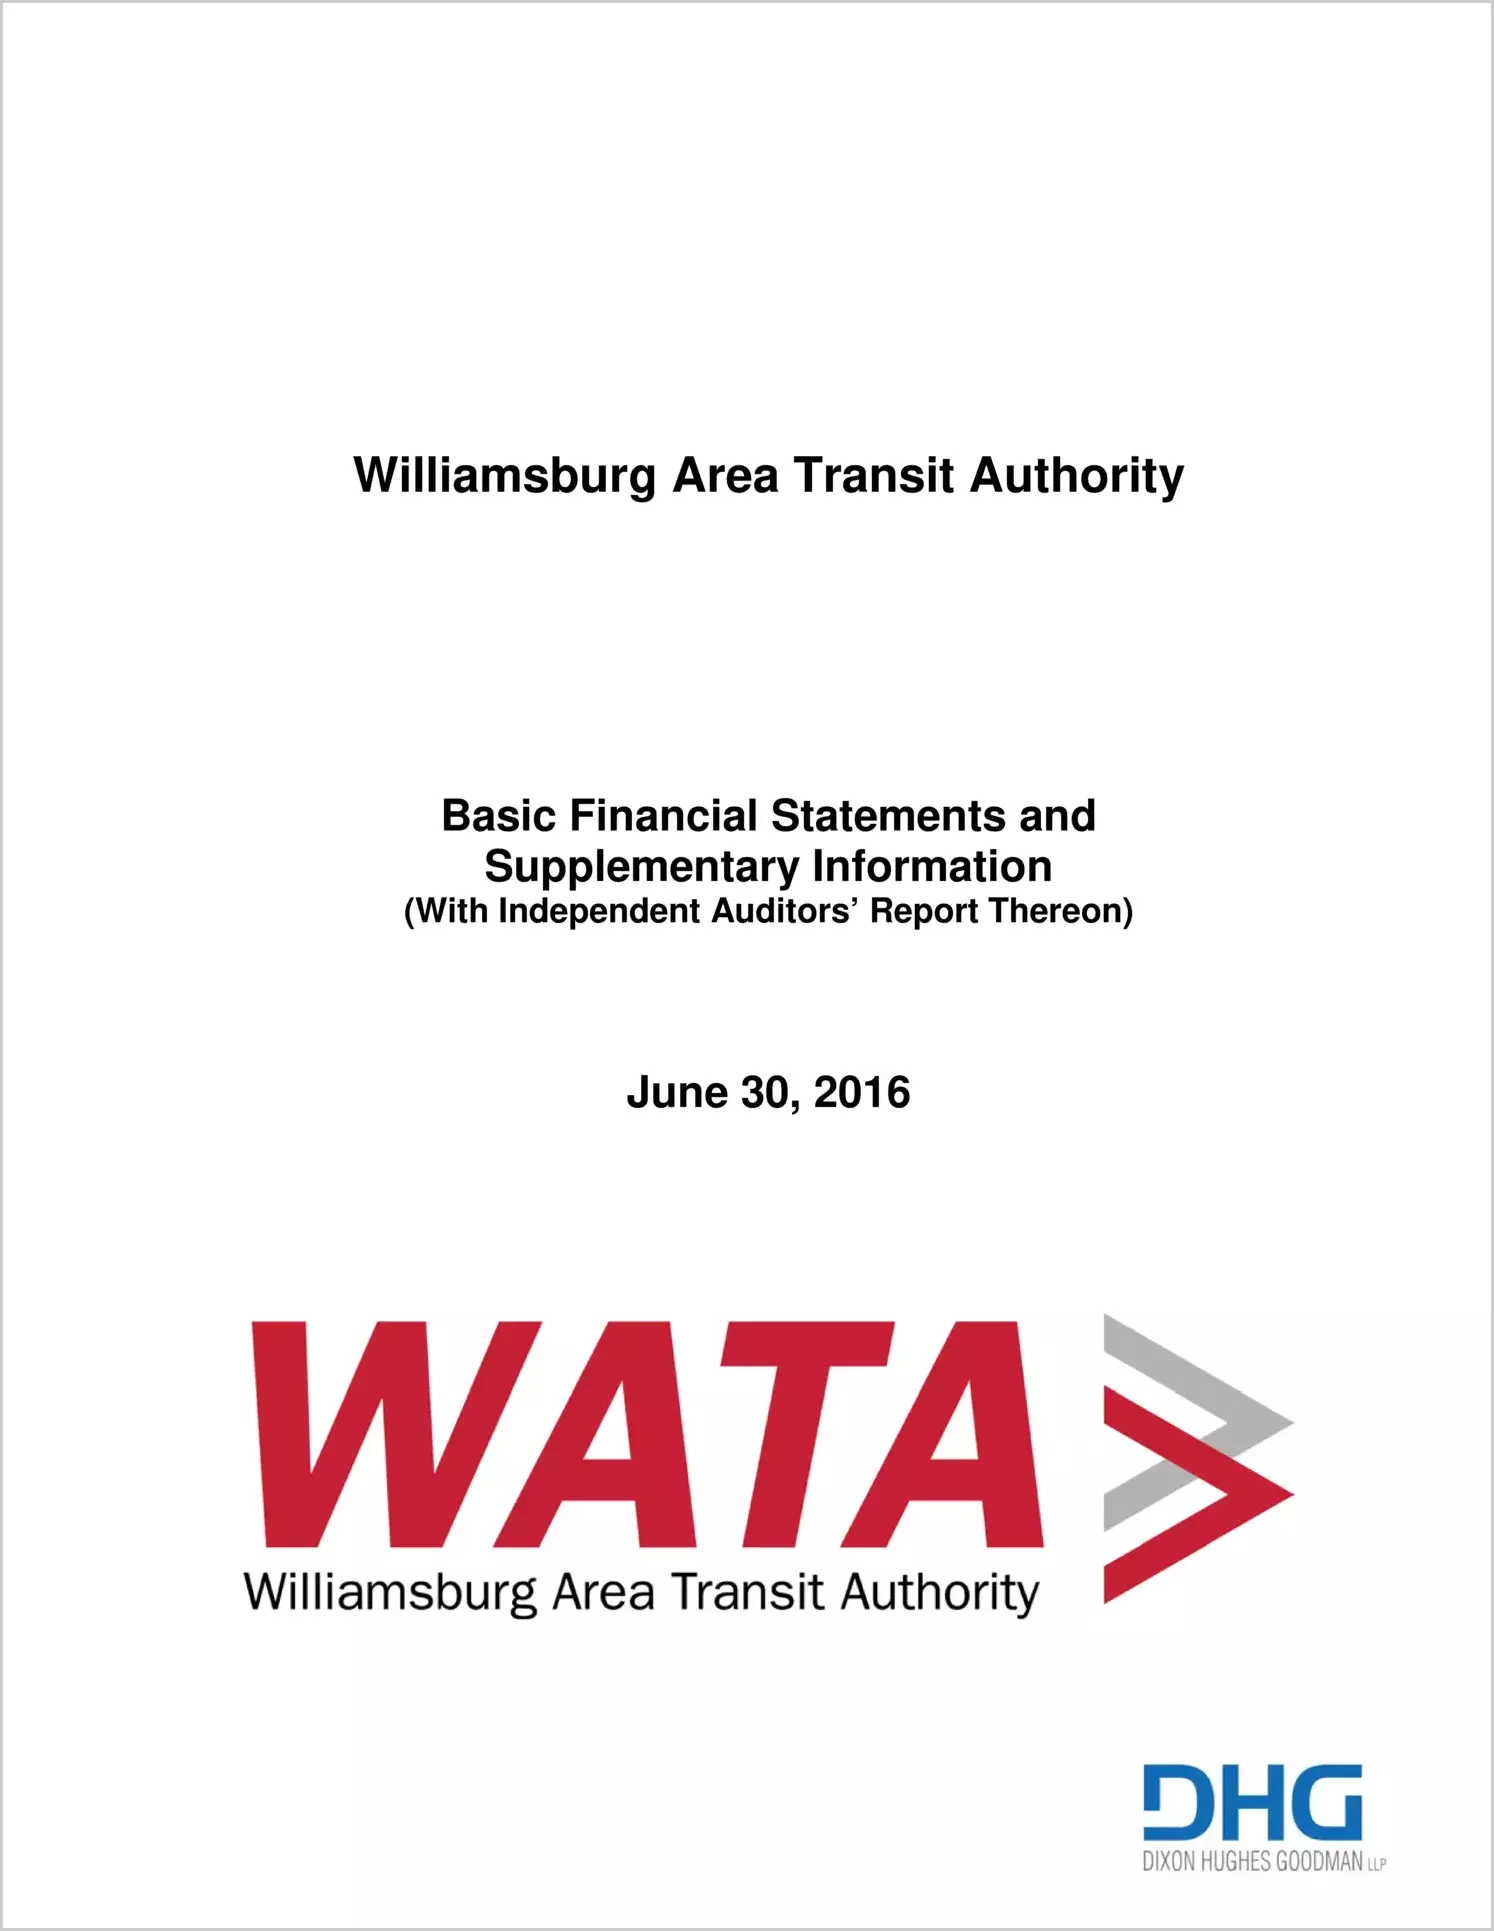 2016 ABC/Other Annual Financial Report  for Williamsburg Area Transit Authority